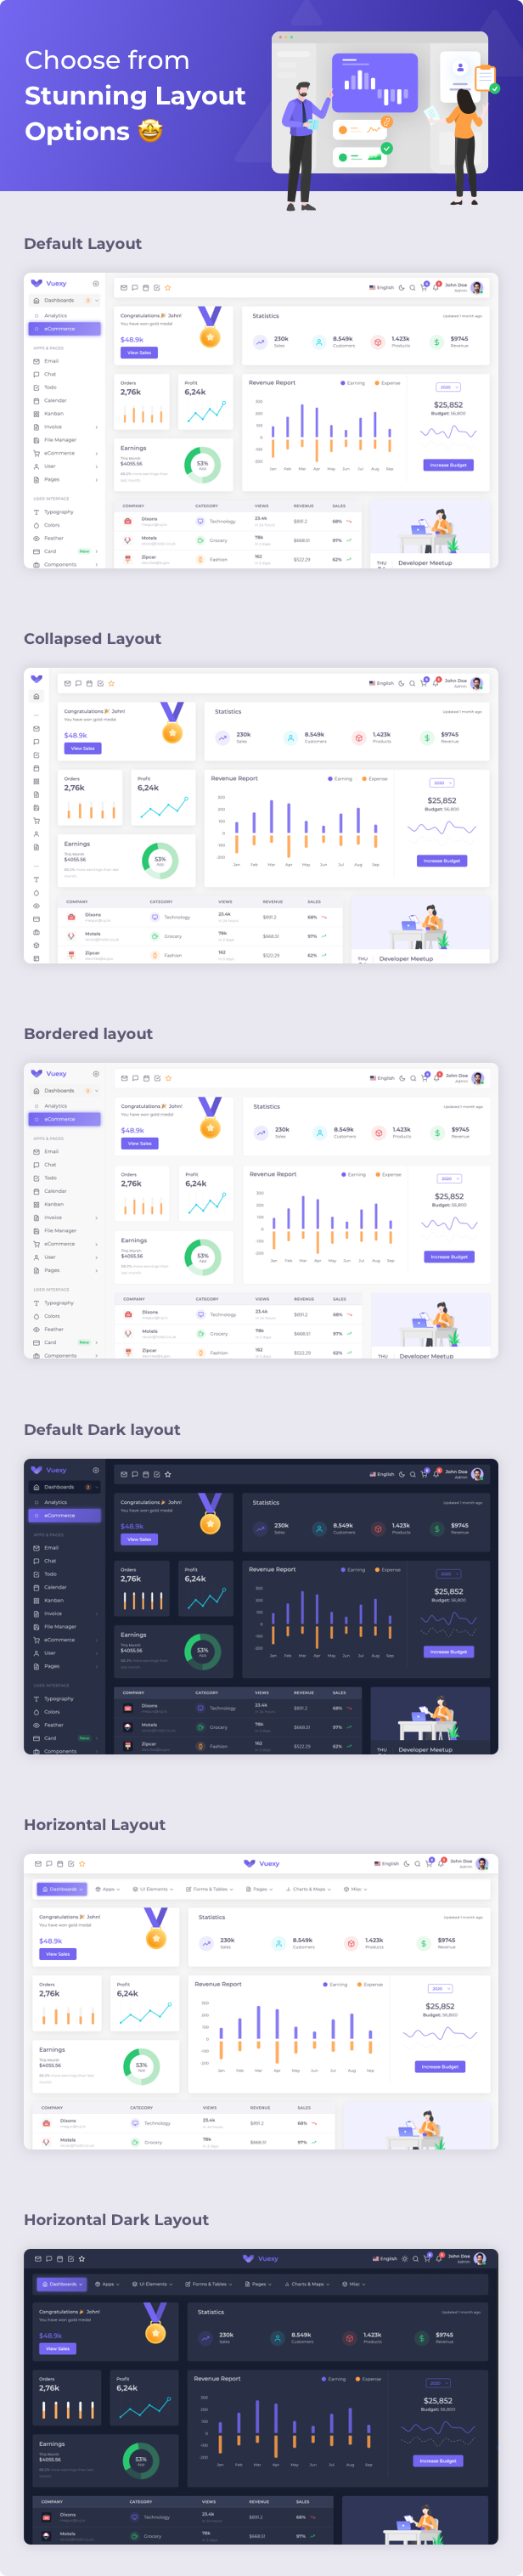 09 vuexy layout options - Vuexy – Figma Admin Dashboard UI Kit Template with Atomic Design System